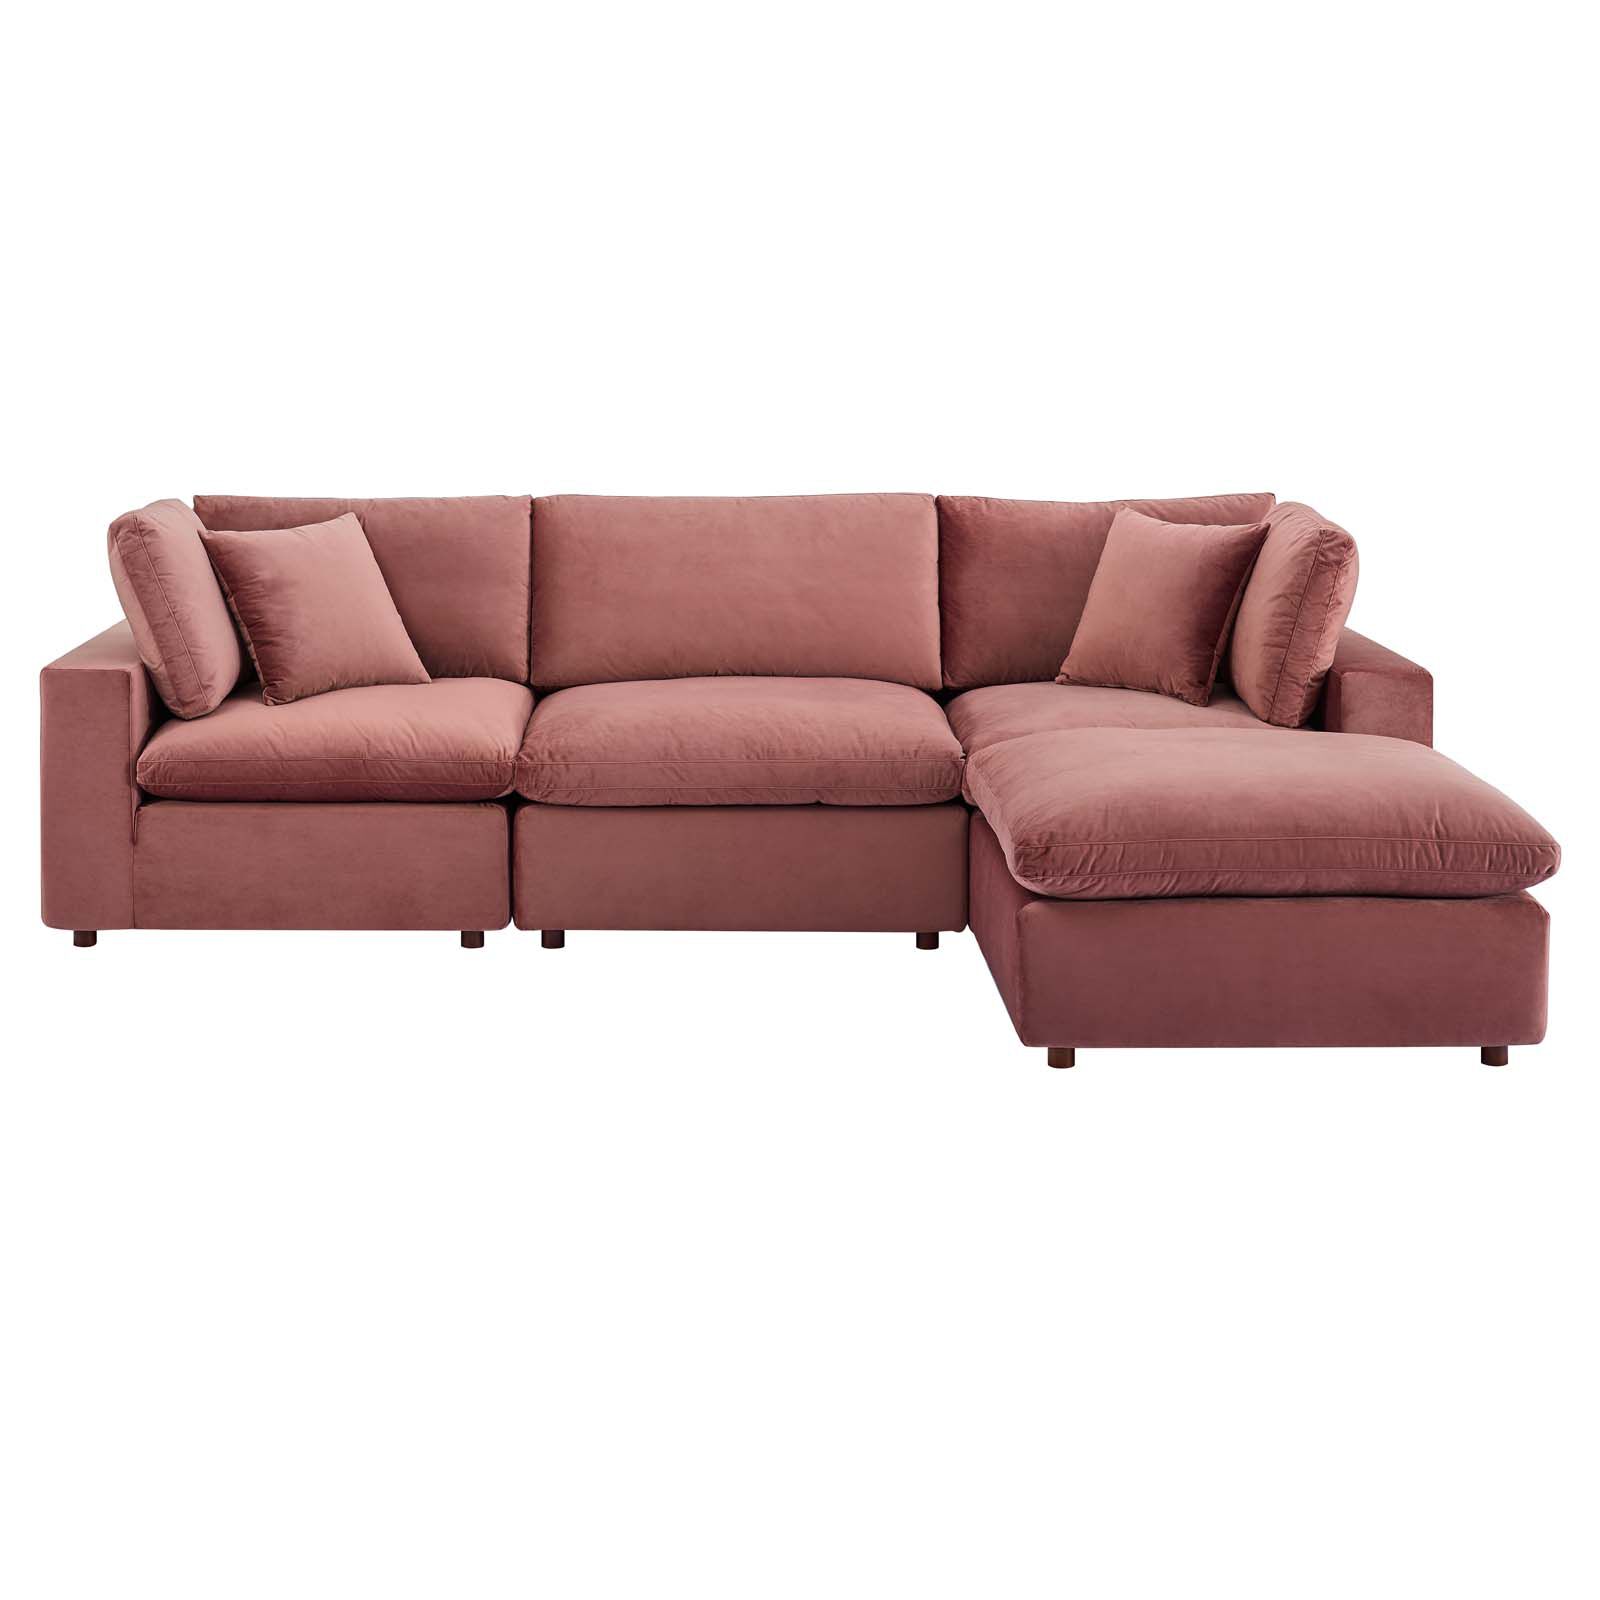 Sectional Sofa Pink From Aed 4849